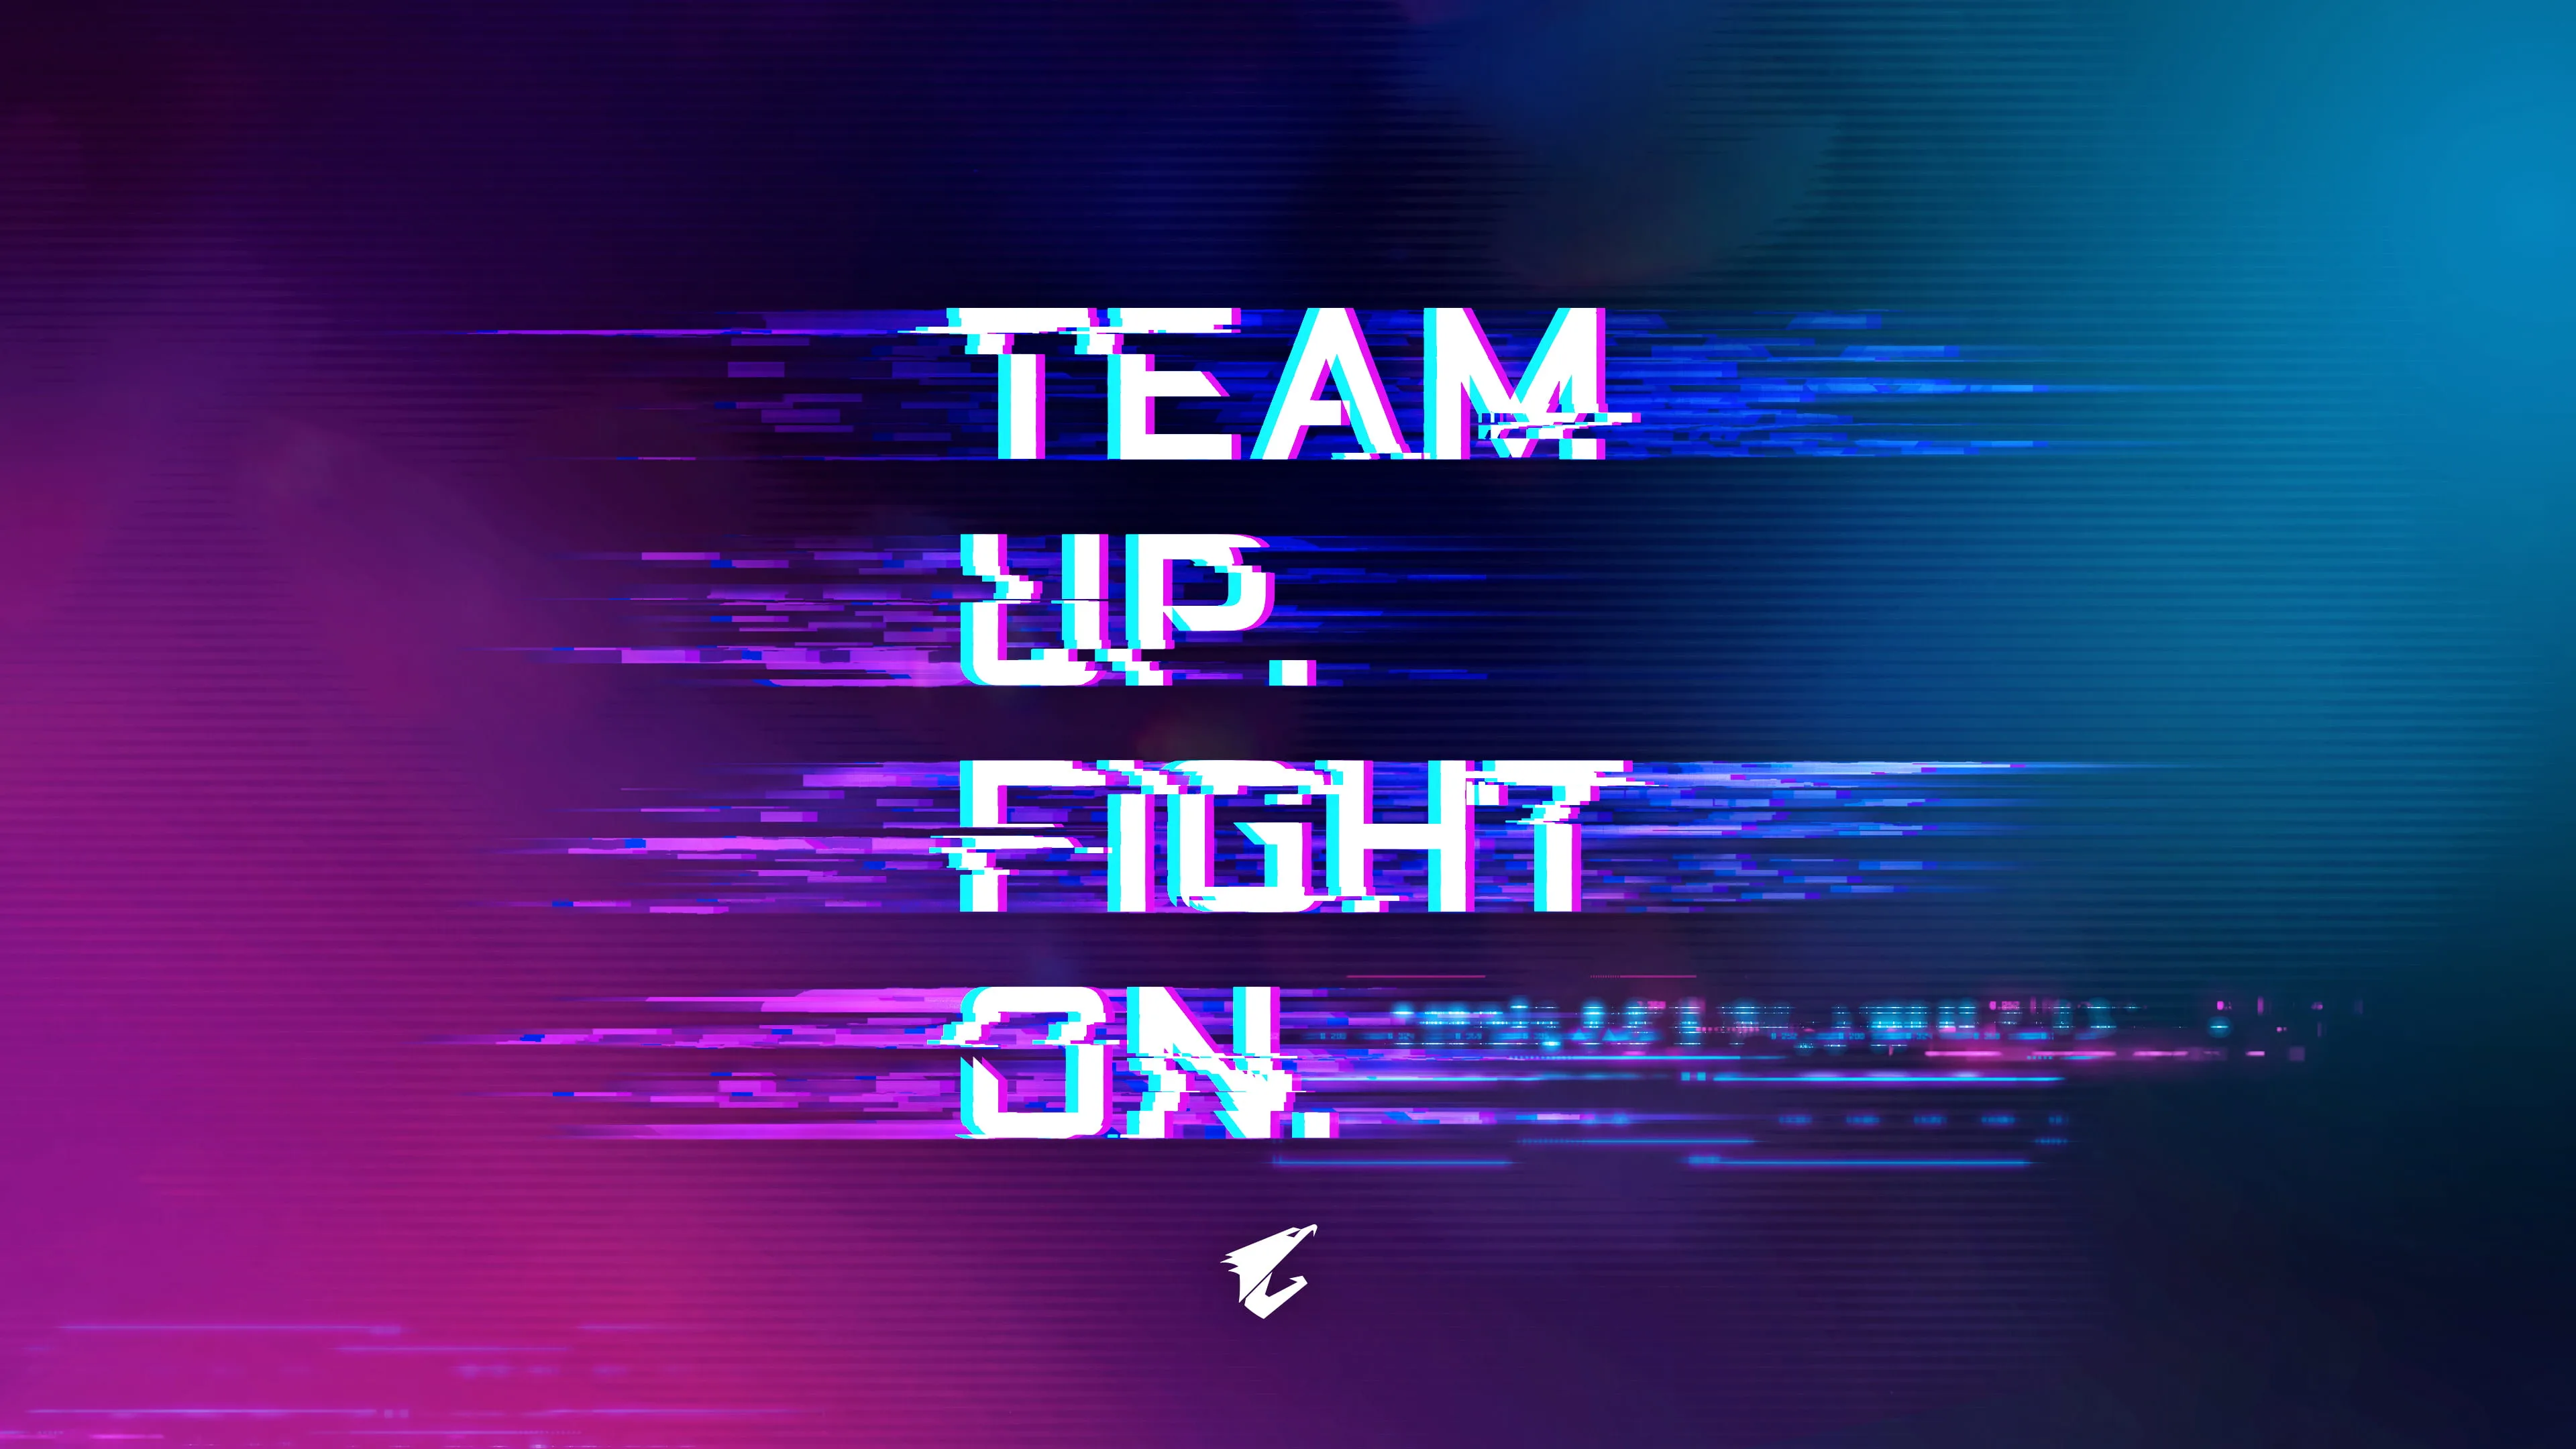 Gear up for epic gaming adventures with this striking Team Up Fight On Glitch Background 4K wallpaper. This digital art piece is perfect for gamers and teams looking to inspire teamwork and motivation with a dynamic desktop background featuring glitch aesthetics and a rallying message.